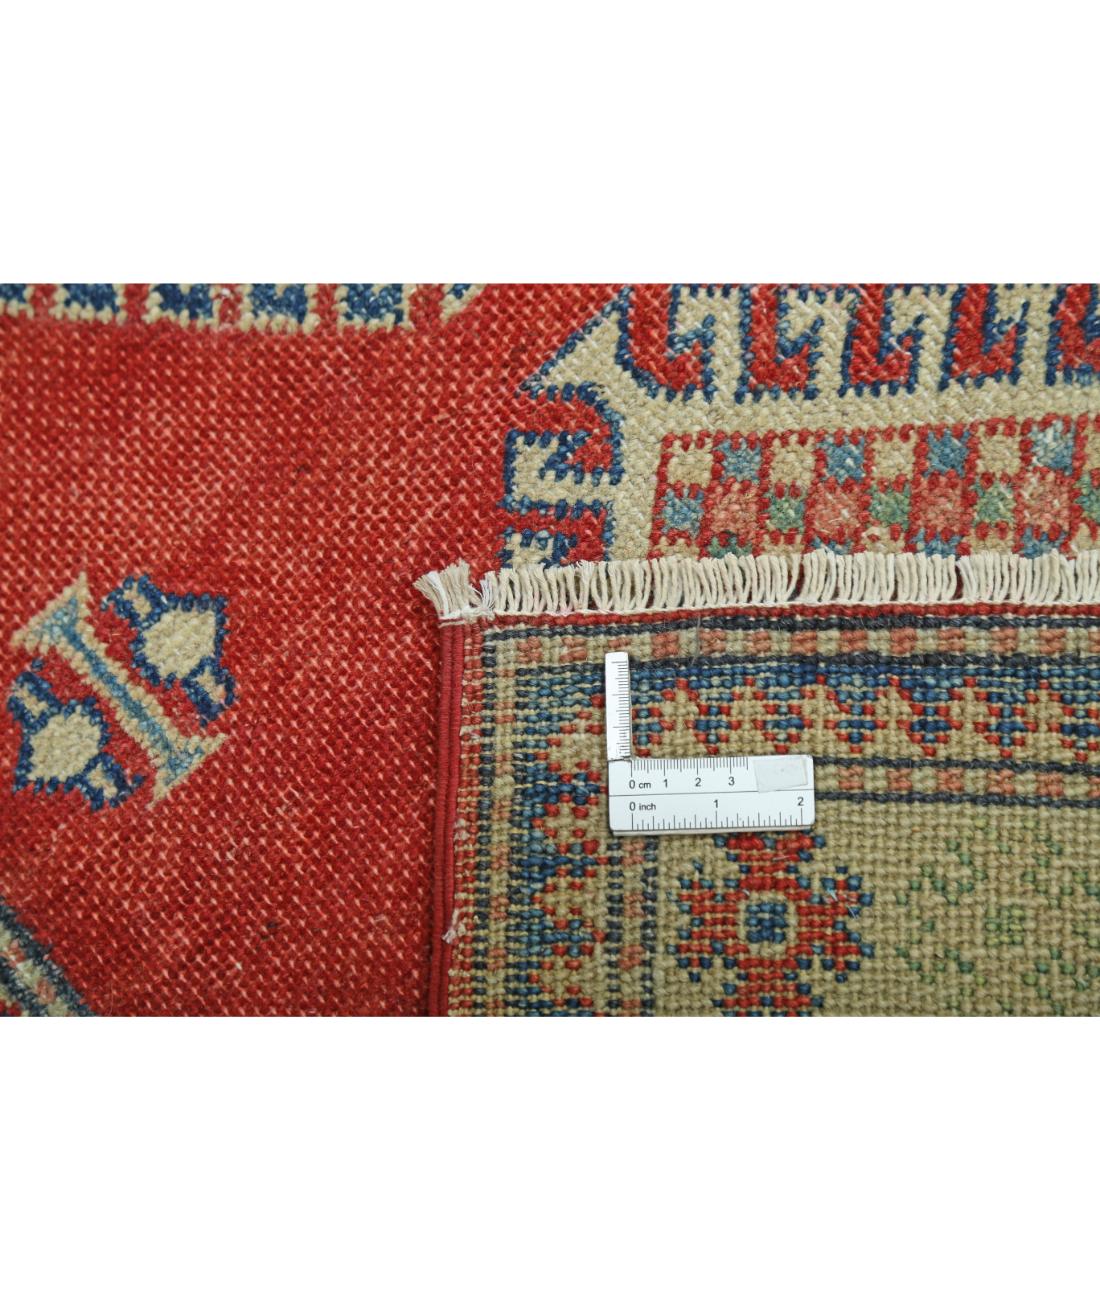 Hand Knotted Tribal Kazak Wool Rug - 2'10'' x 4'10'' 2' 10" X 4' 10" (86 X 147) / Red / Ivory